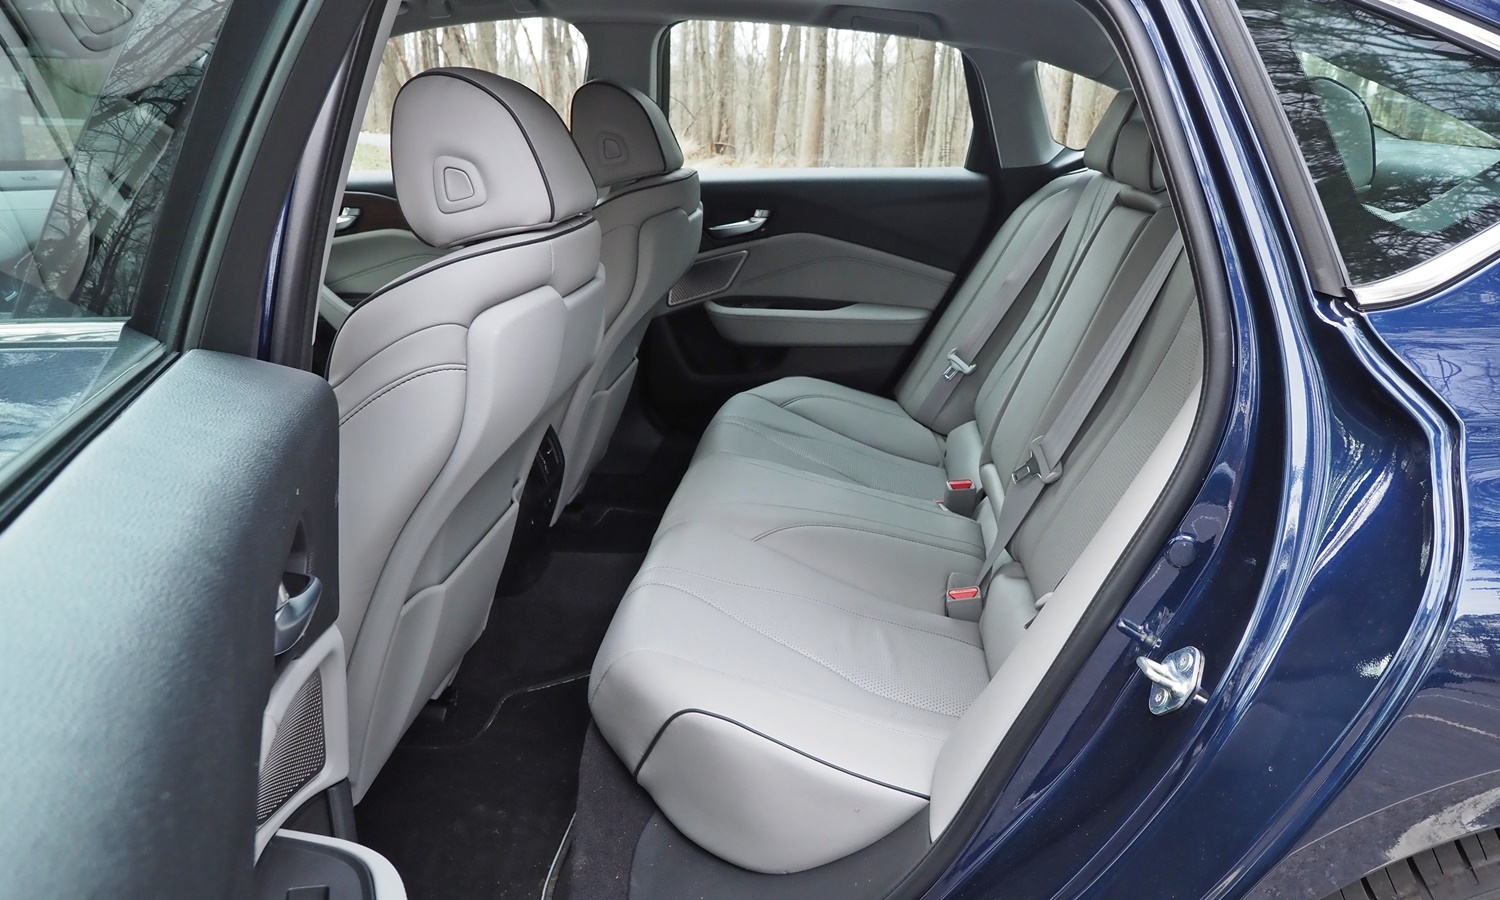 TLX Reviews: Acura TLX rear seat